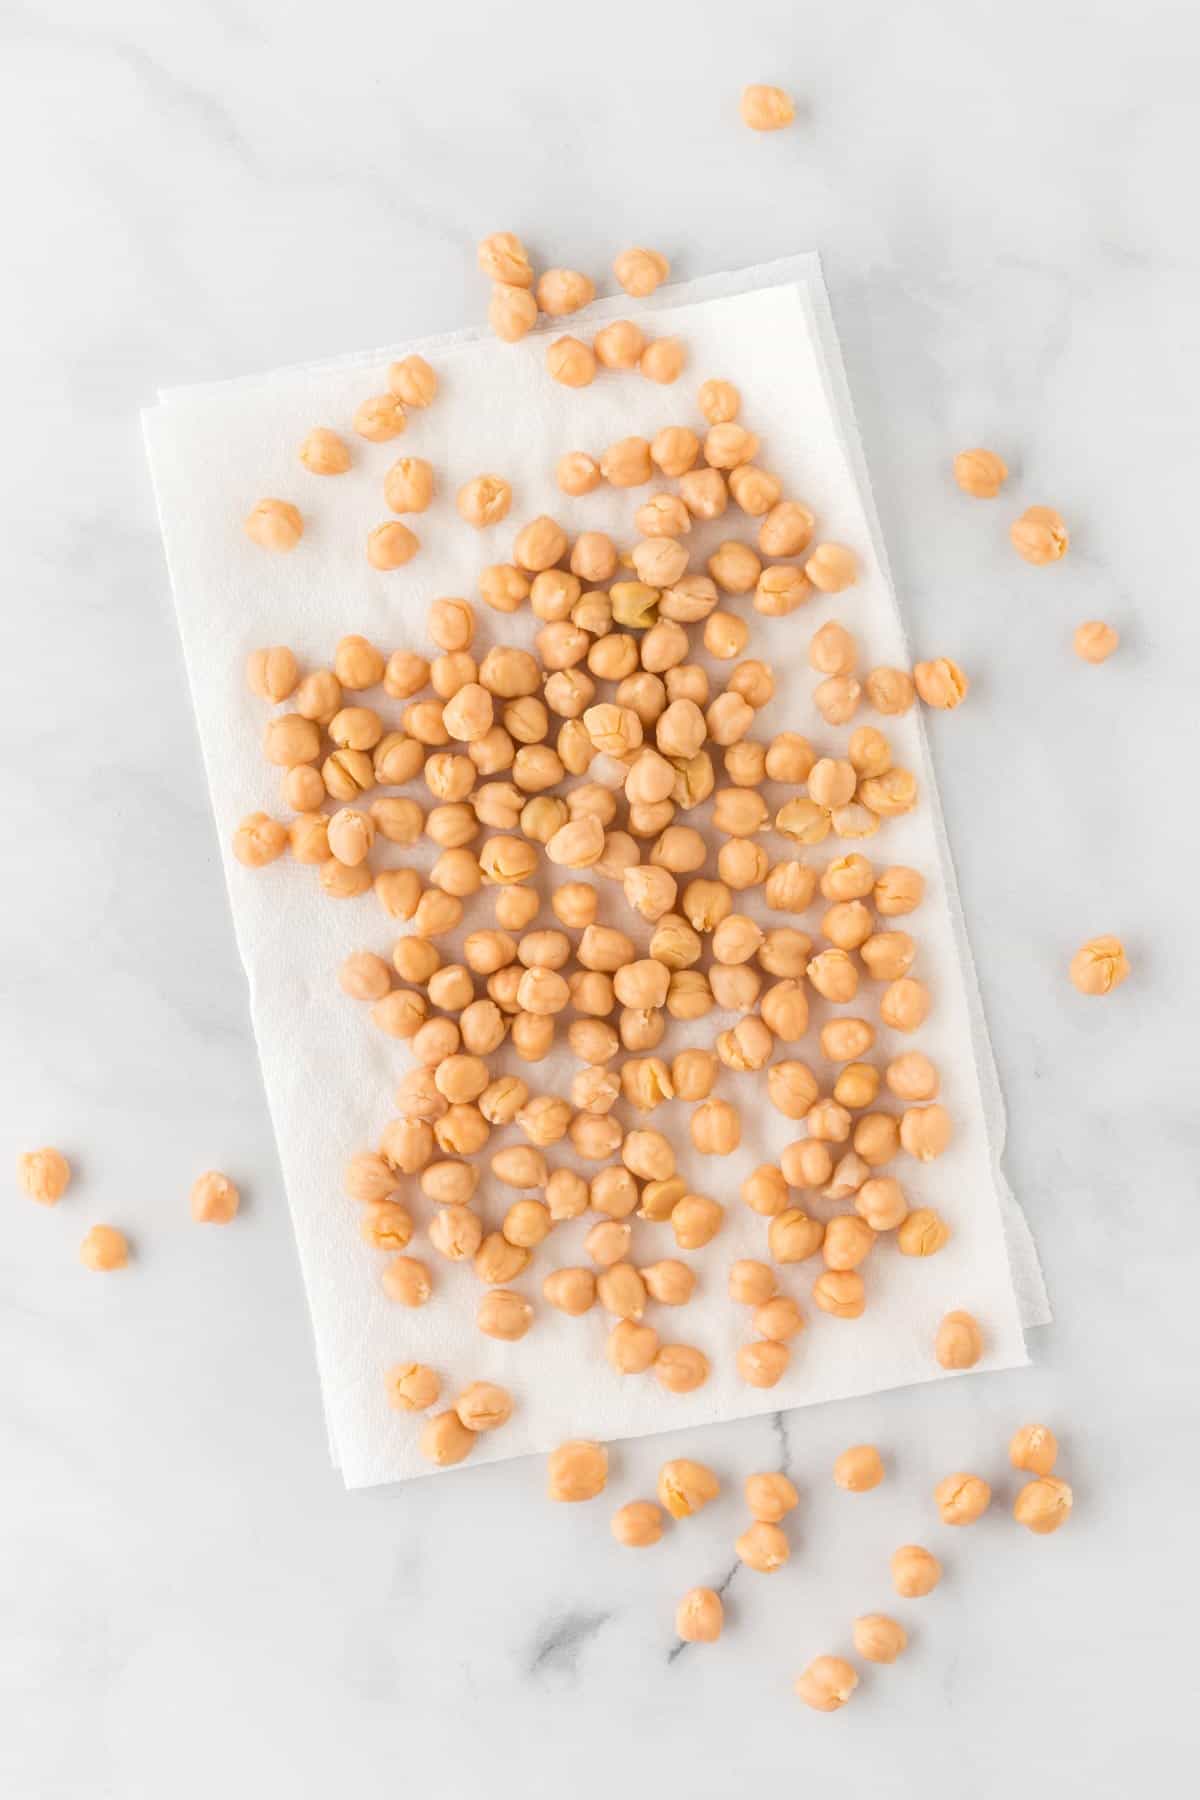 A photo of chickpeas scattered on a paper towel.